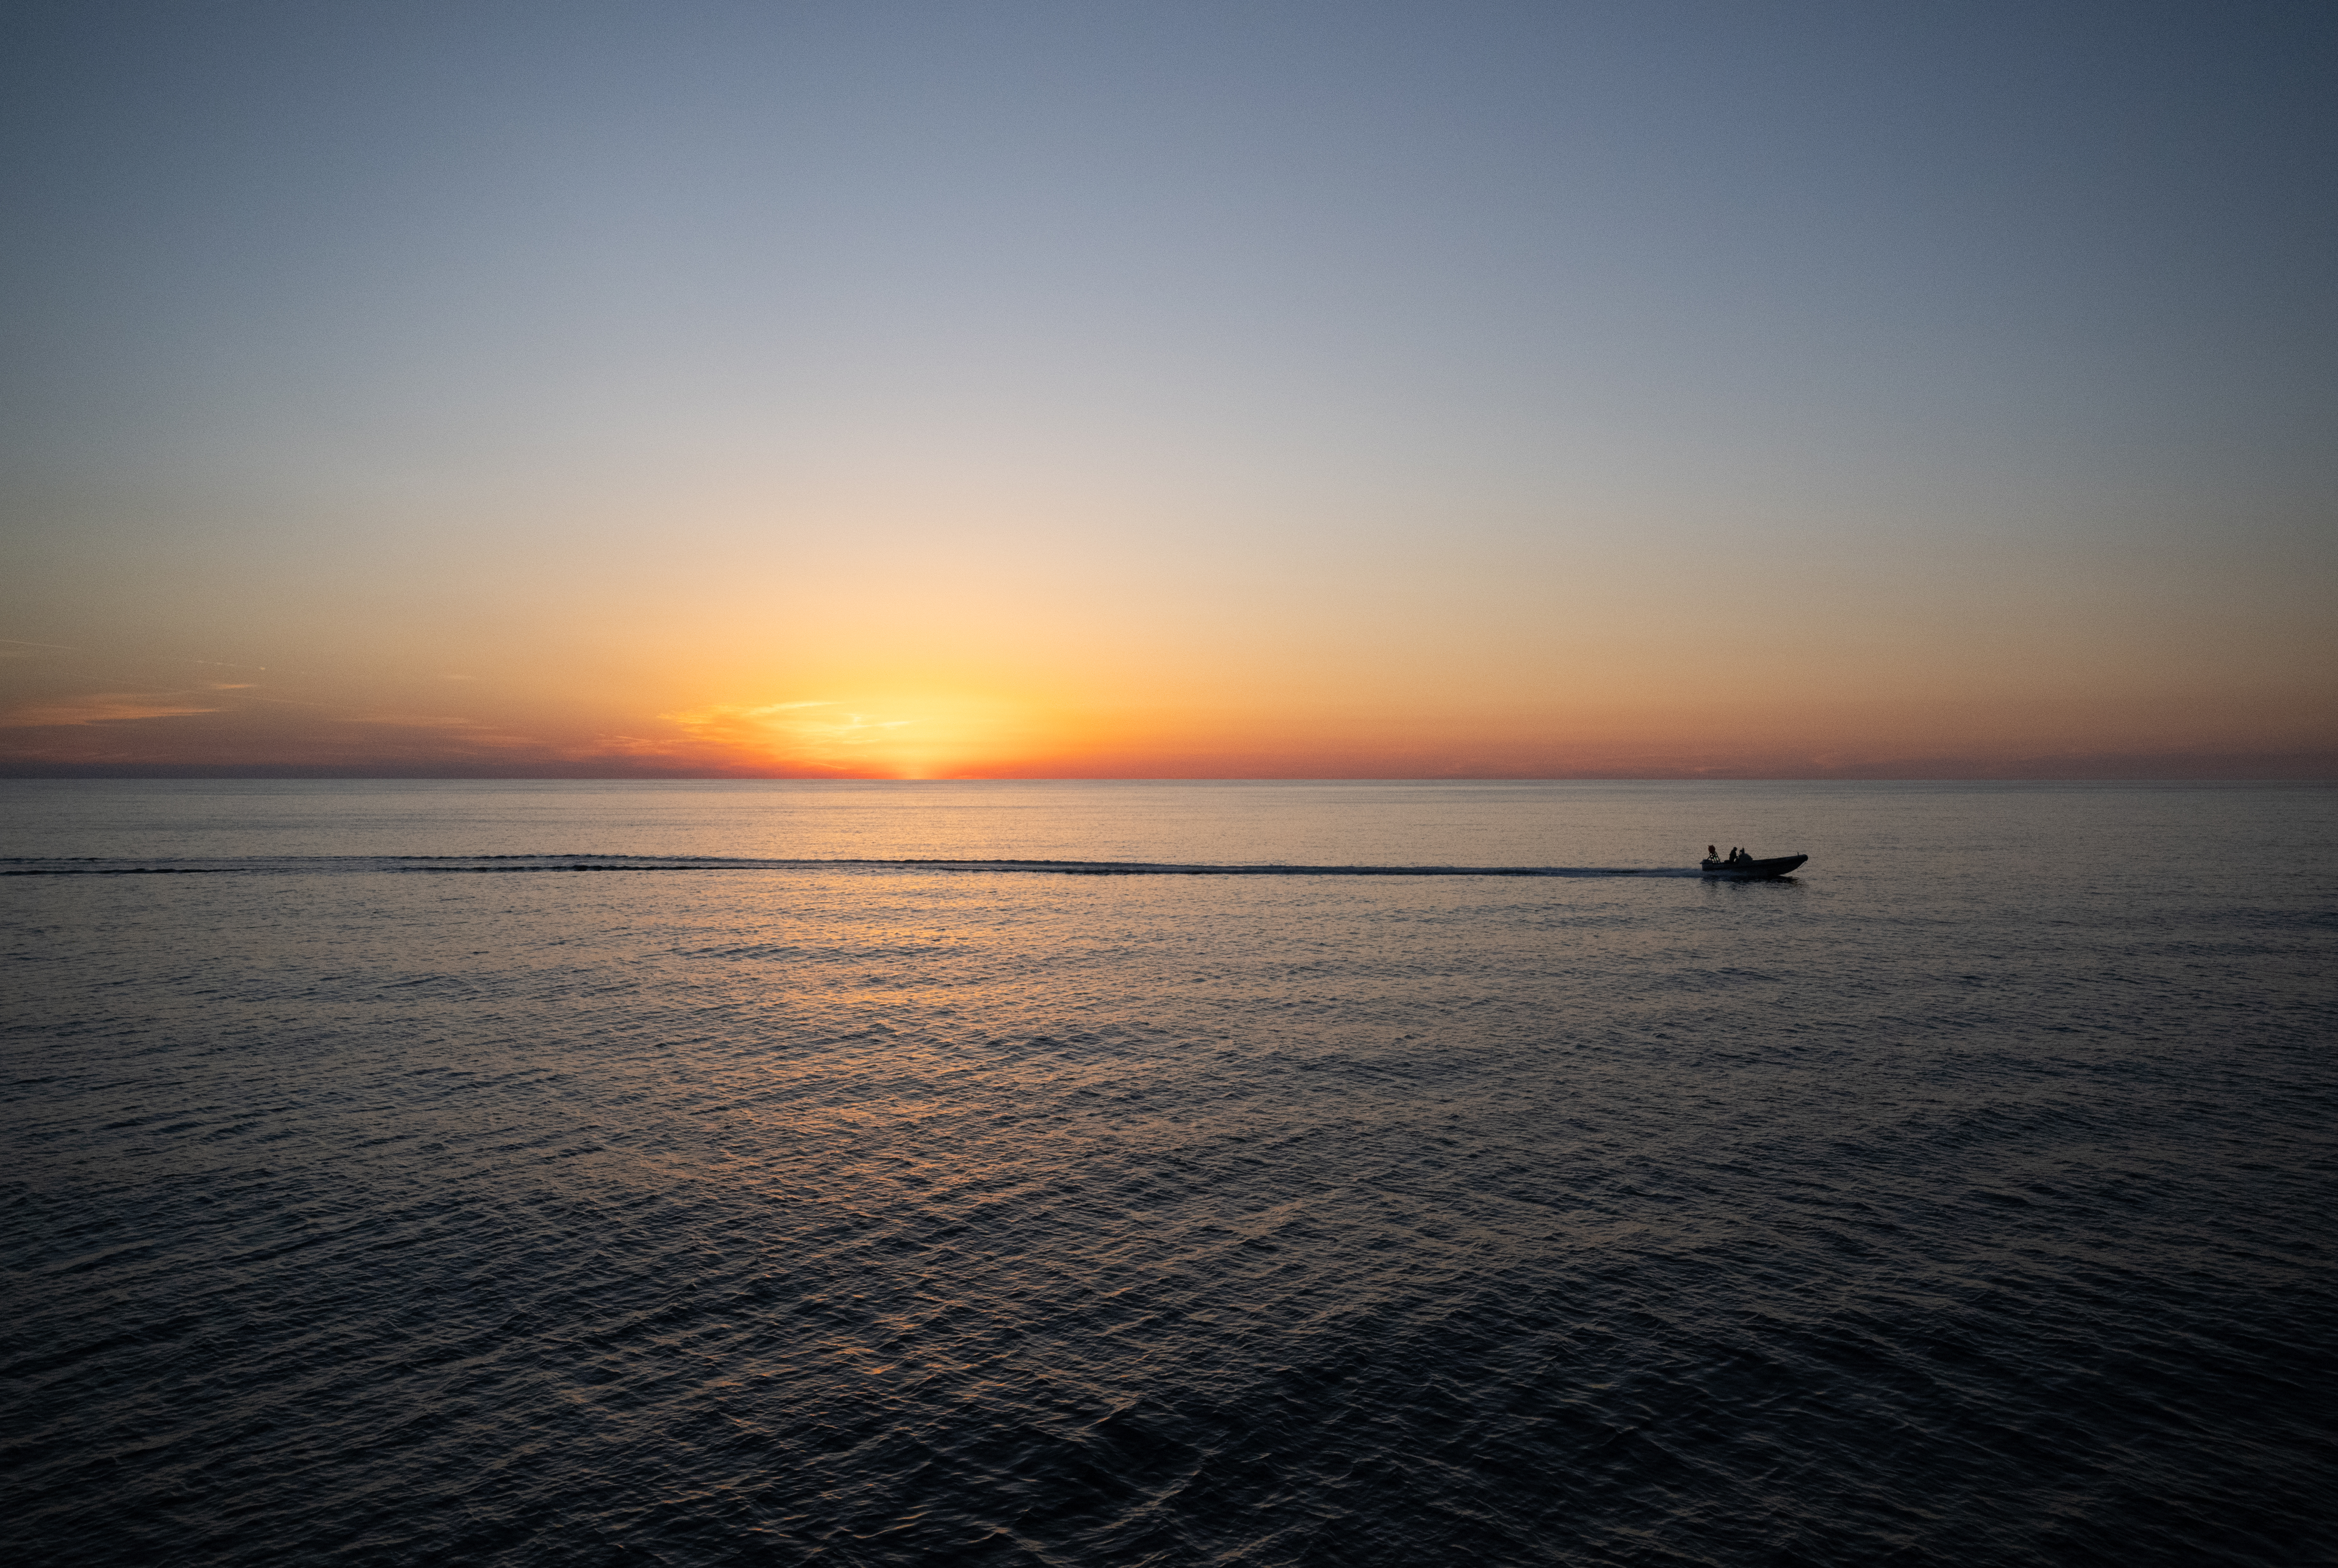 The sky and water take up equal parts of this image. At the horizon, the Sun colors the sky orange, with its light reflecting off a few distant clouds. A fast boat in the distance cuts a line across the water as it moves from left to right. The boat and the person aboard are in silhouette.